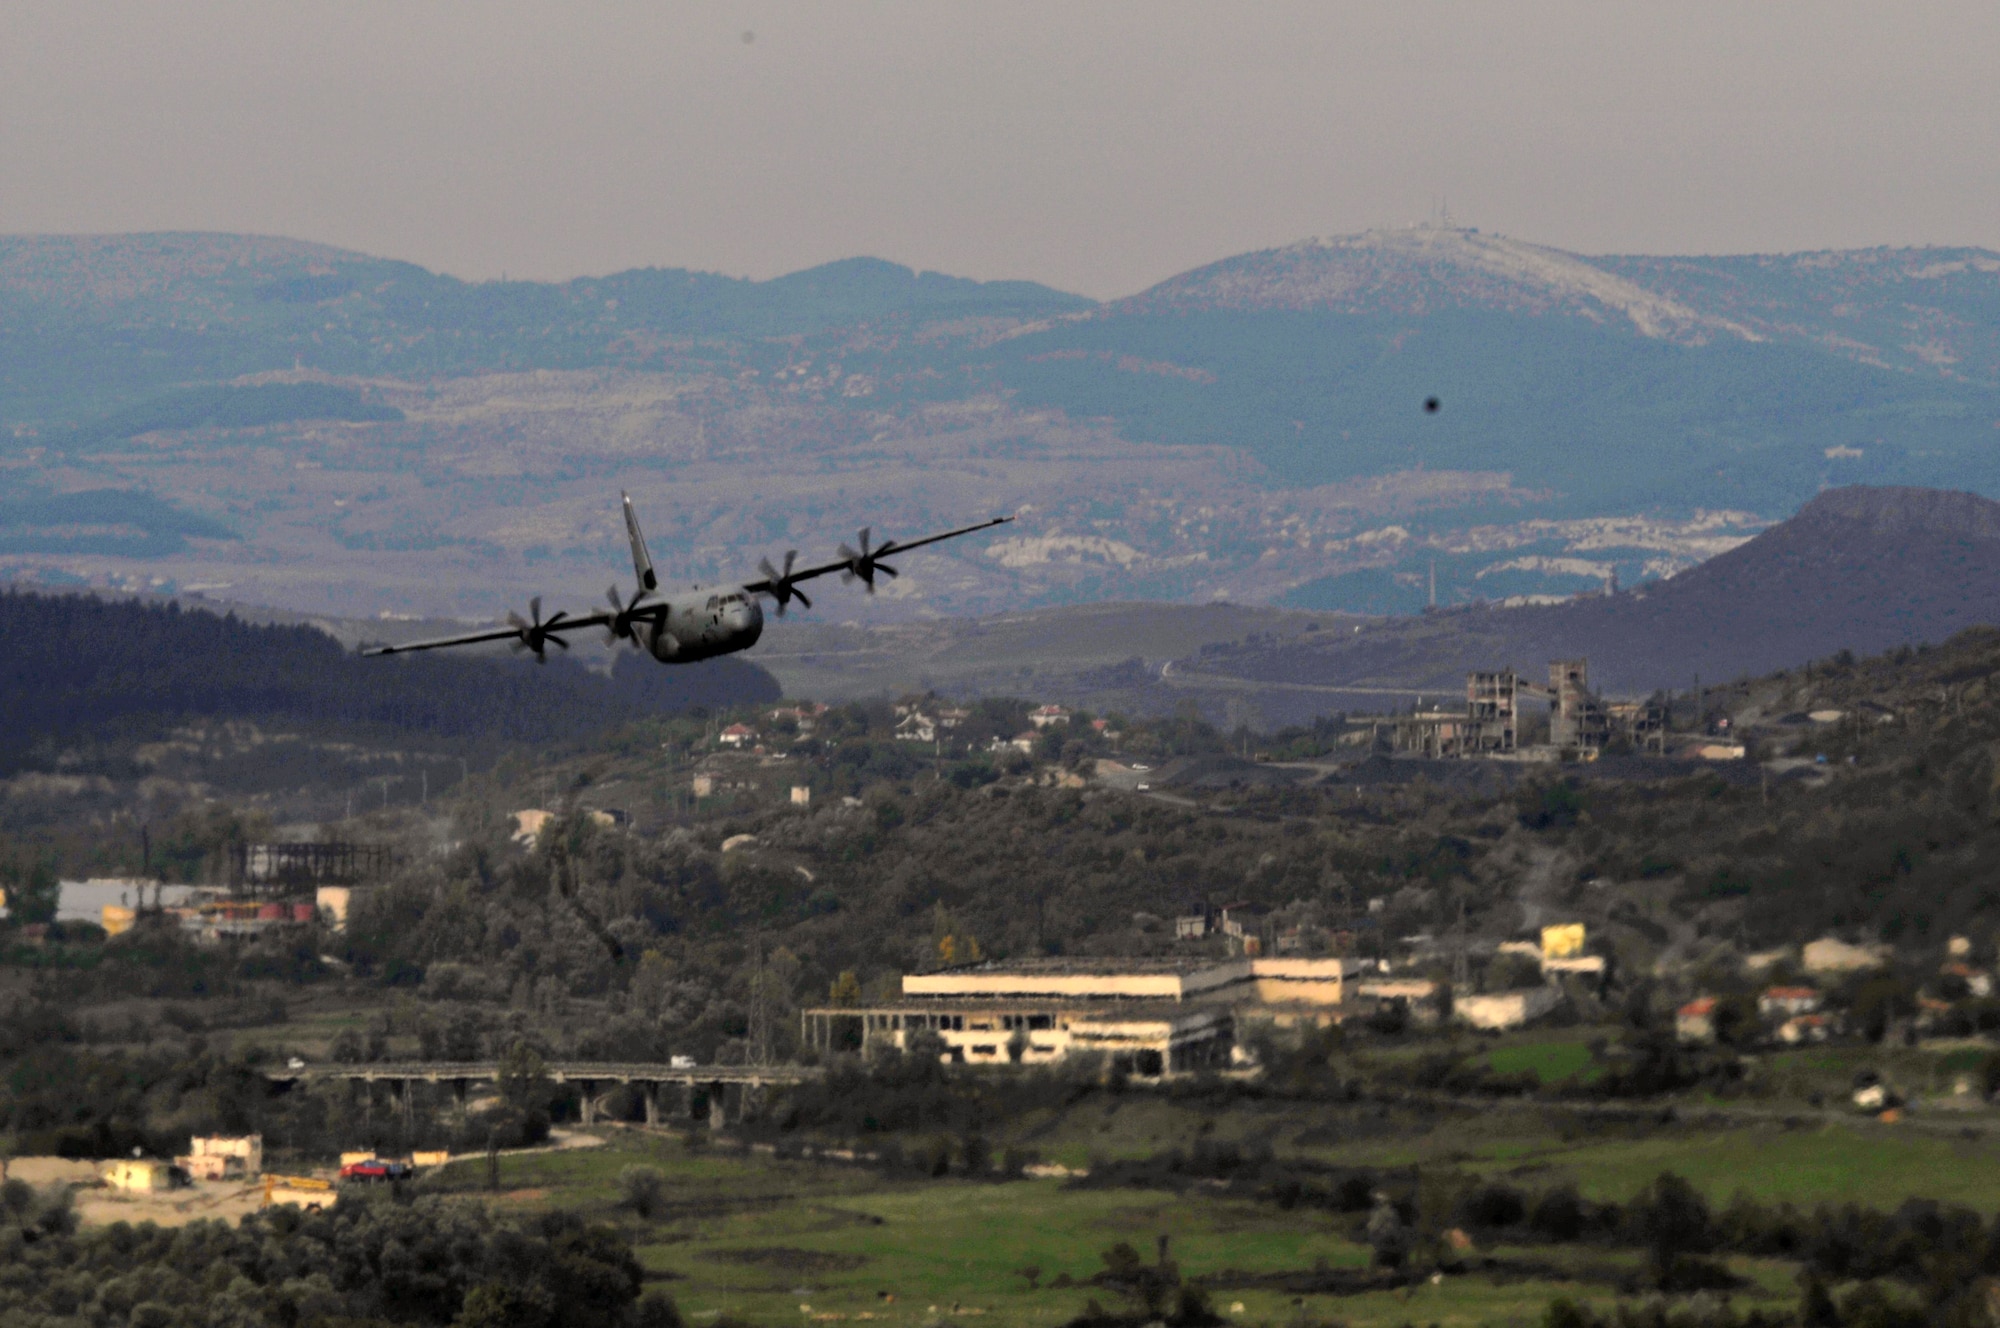 A U.S. Air Force C-130J Super Hercules flies through the mountains surrounding Plovdiv, Bulgaria, during Thracian Fall 2010, Oct. 25. Thracian Fall is a two week on-site training deployment designed to build the partnership between the U.S. and Bulgarian Air Force. (U.S. Air Force photo by Tech. Sgt. Michael Voss)